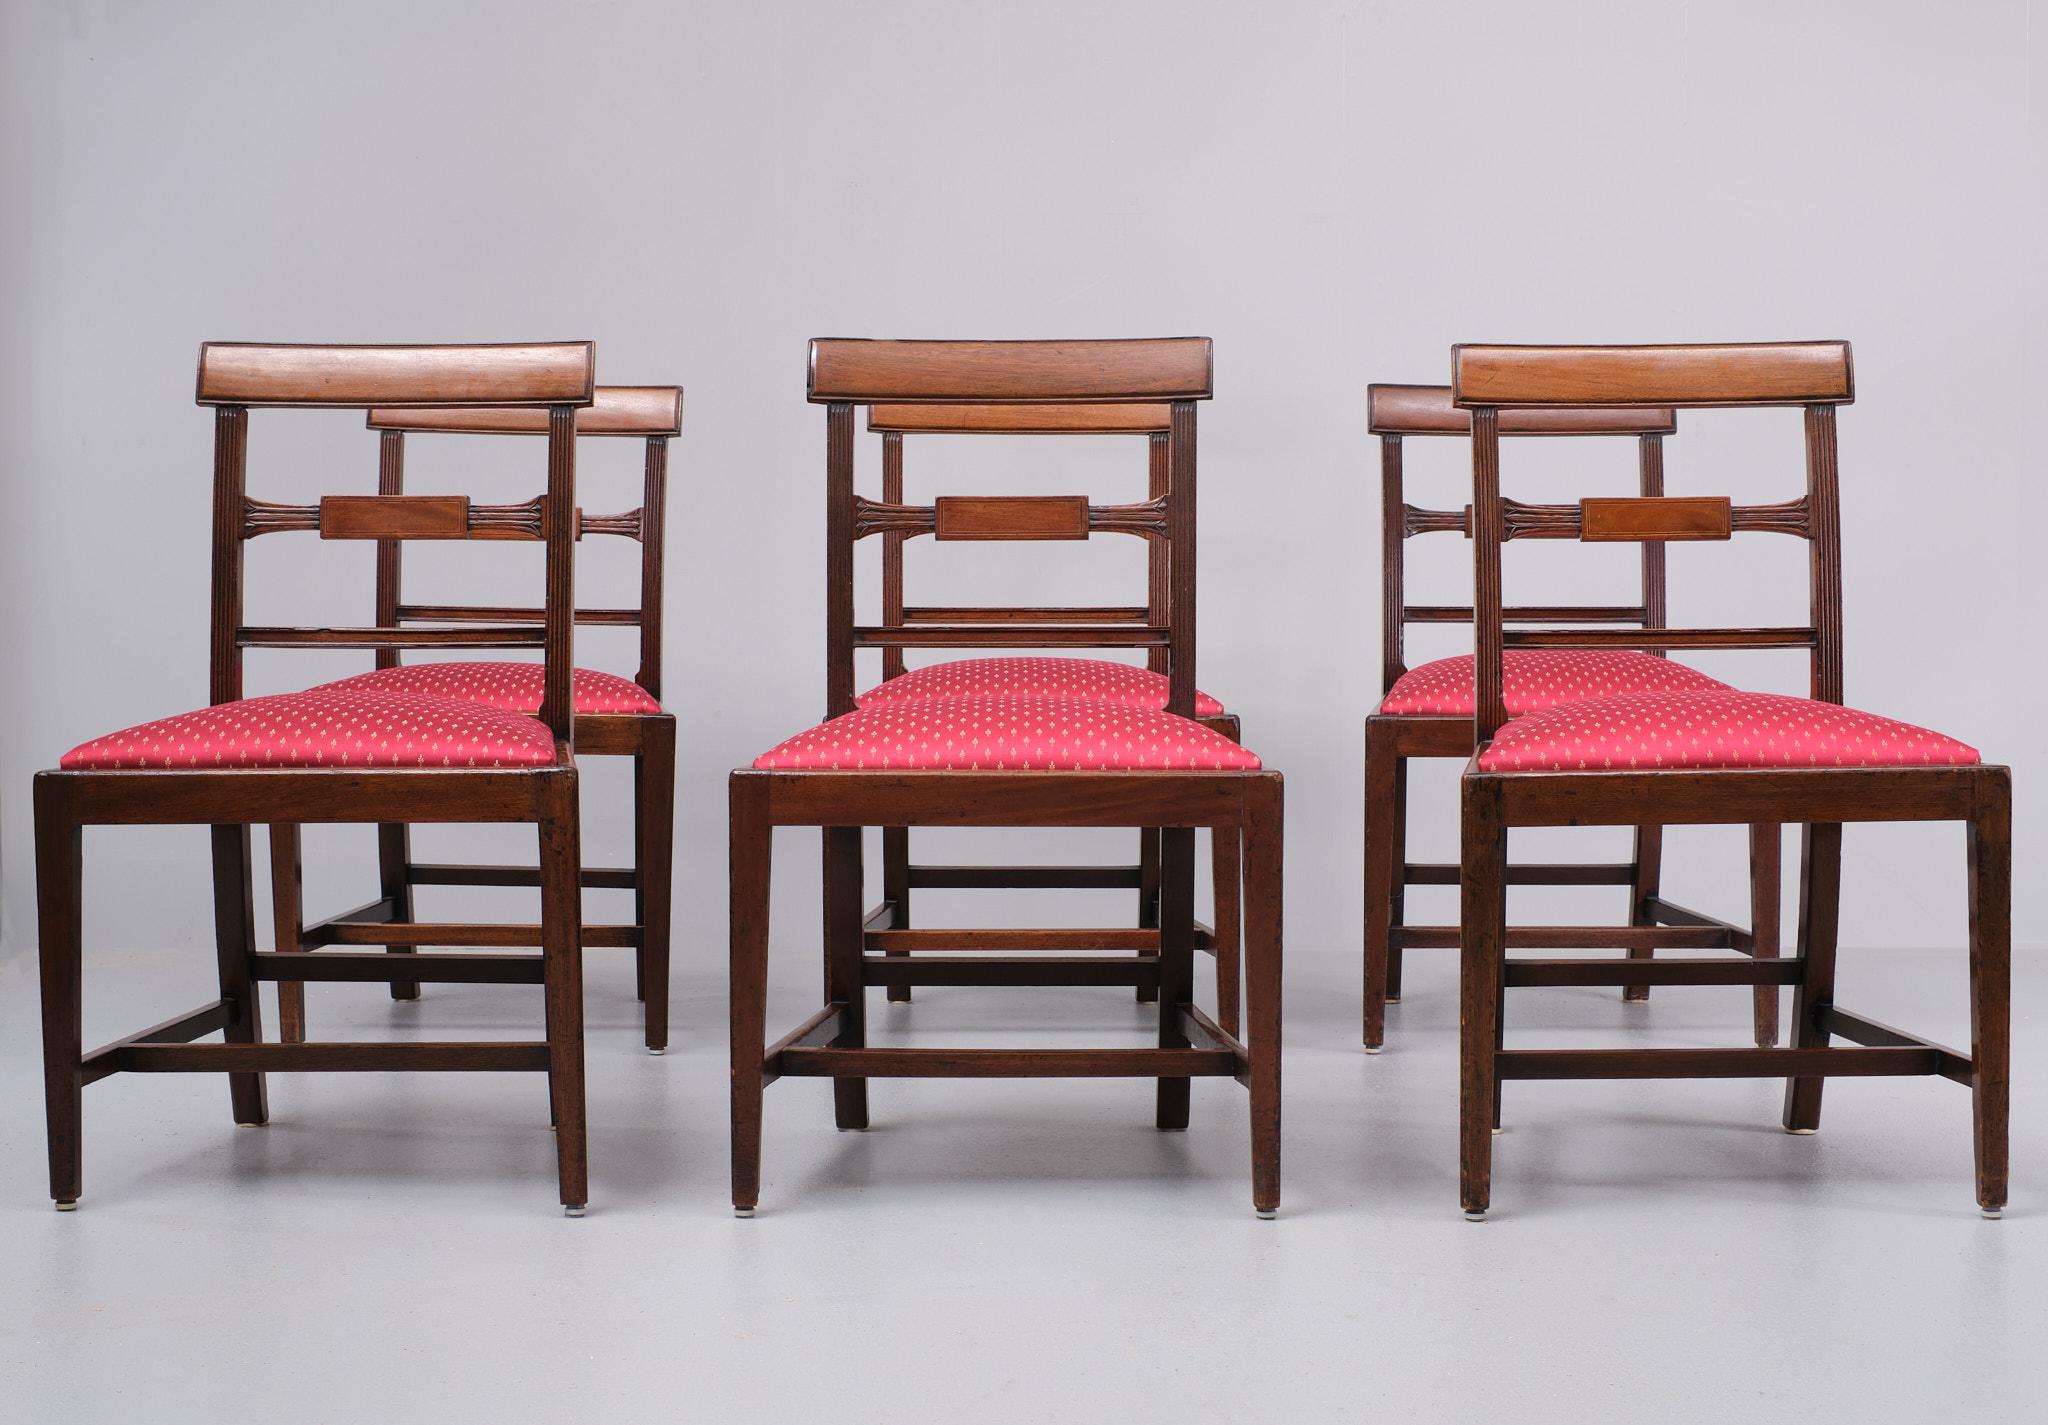 English Antique Regency Dining chairs  1850s England  For Sale